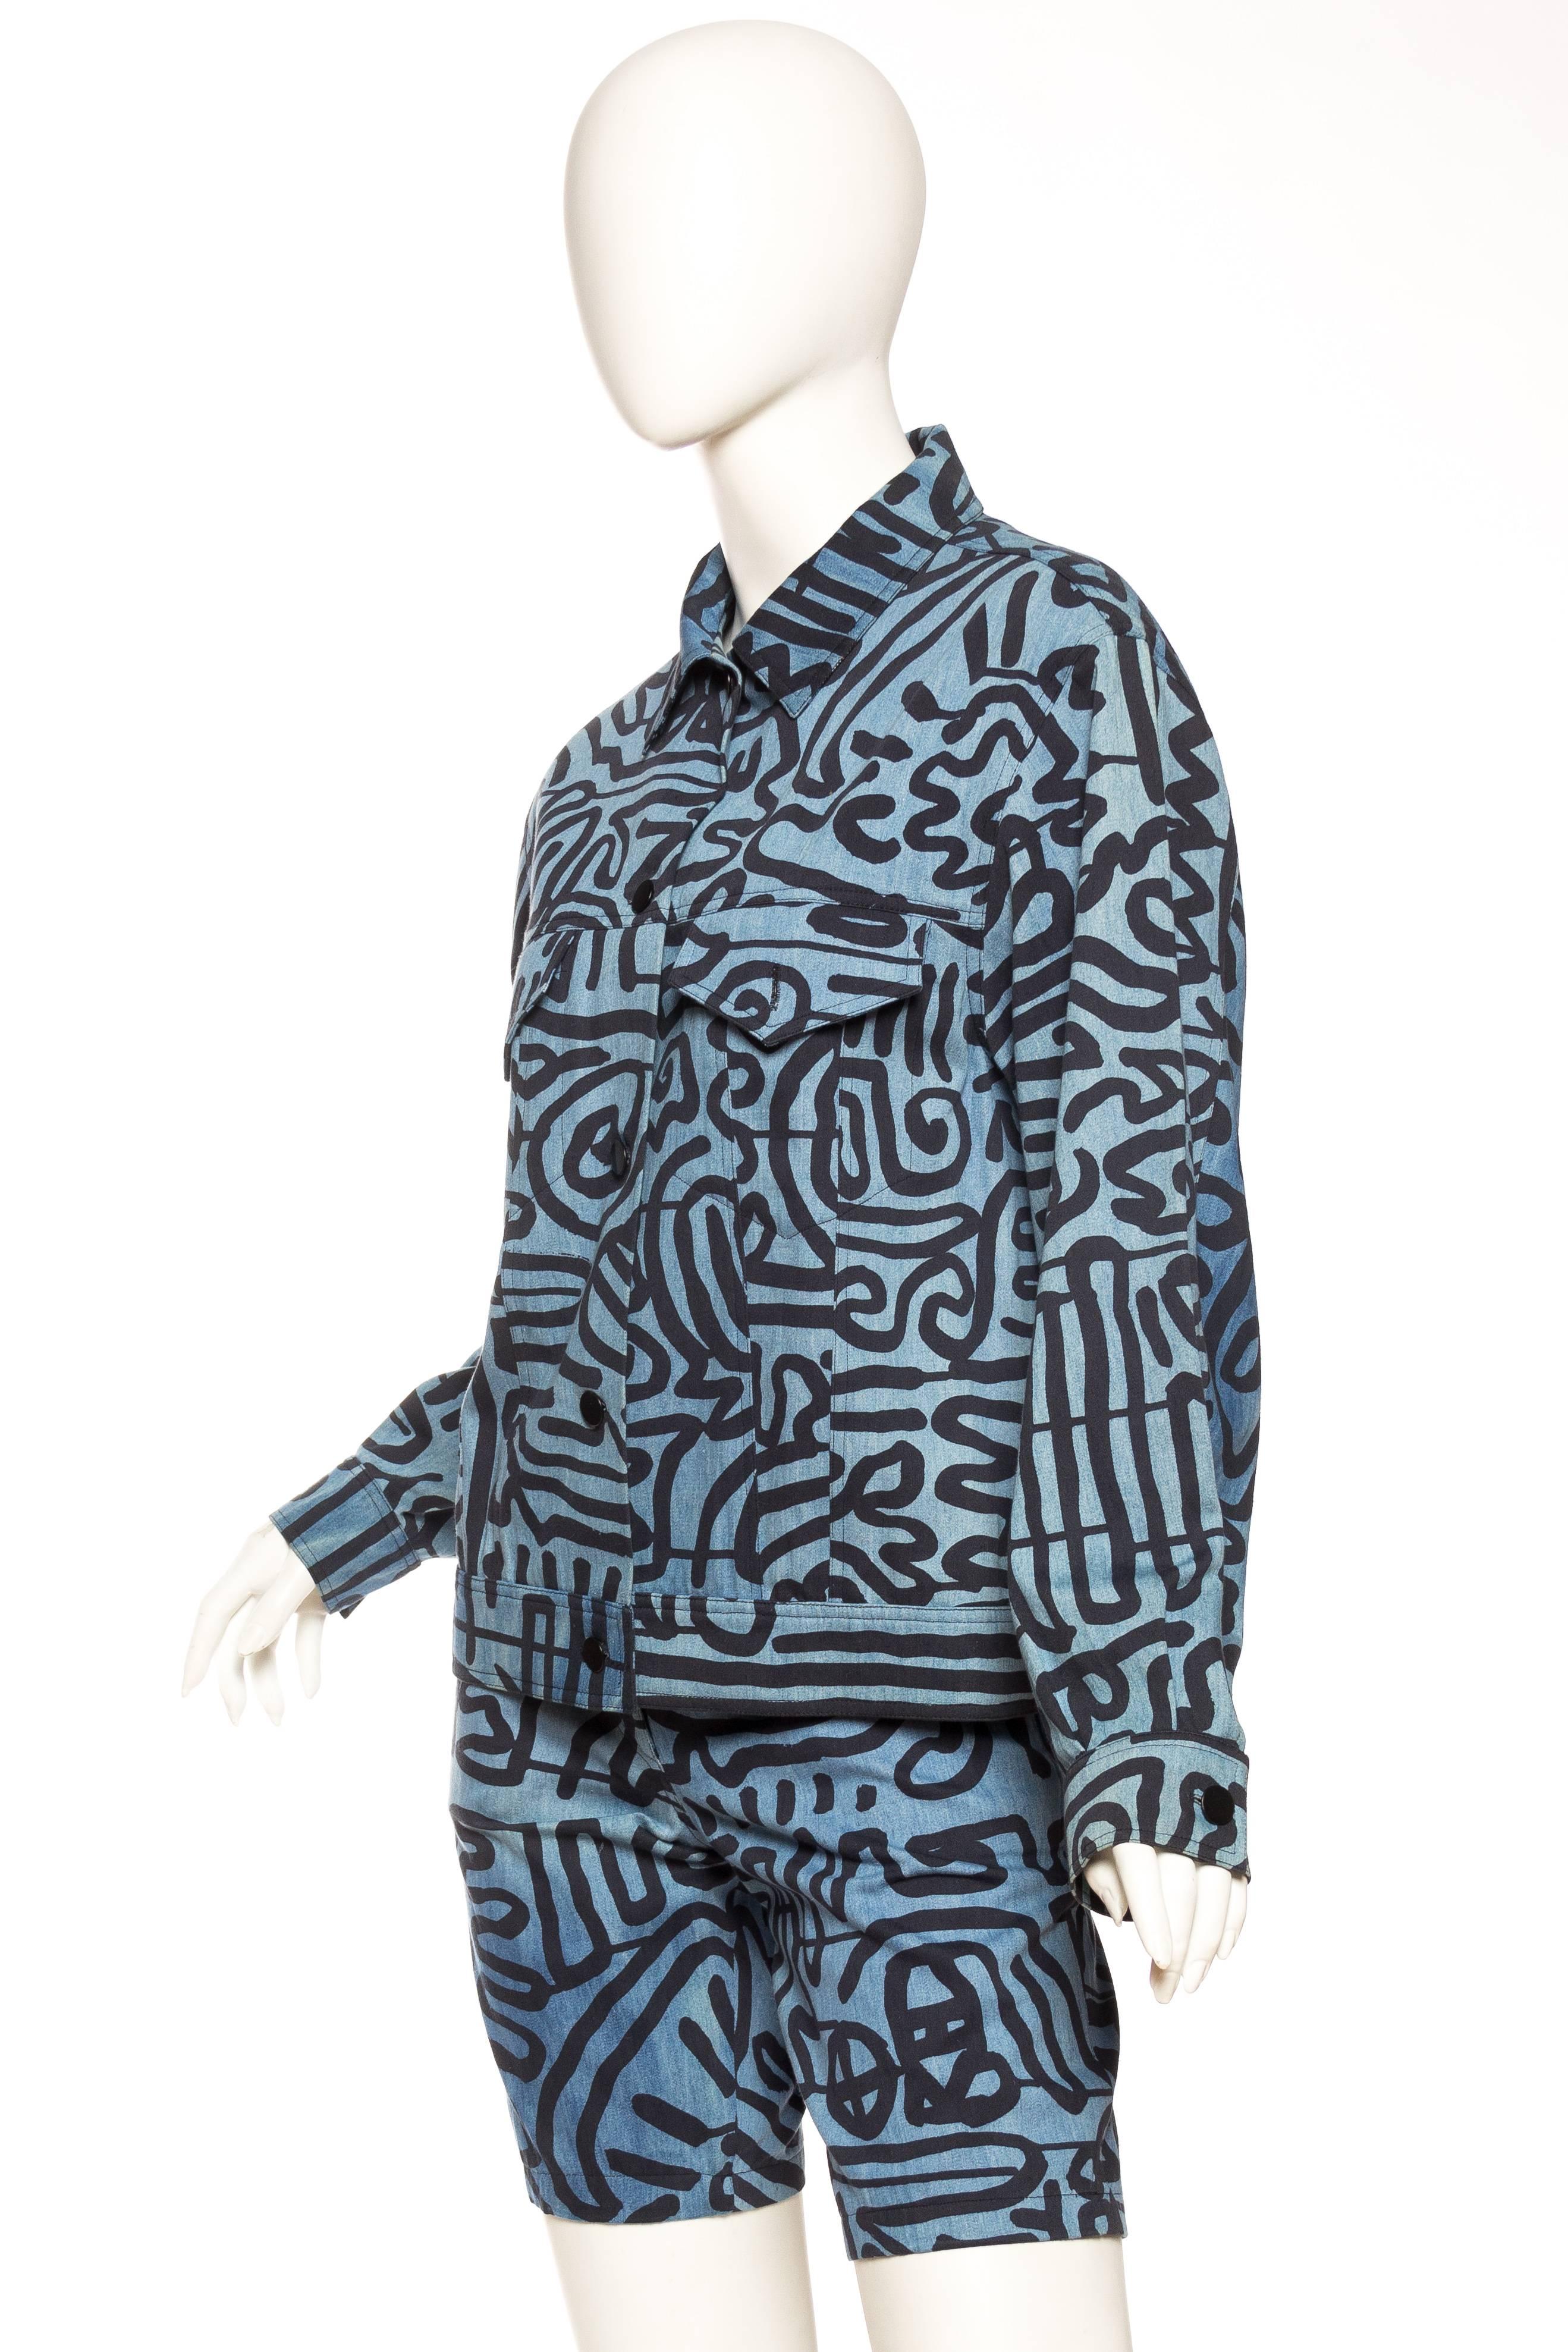 Women's Stephen Sprouse Keith Harring One Off Runway Sample